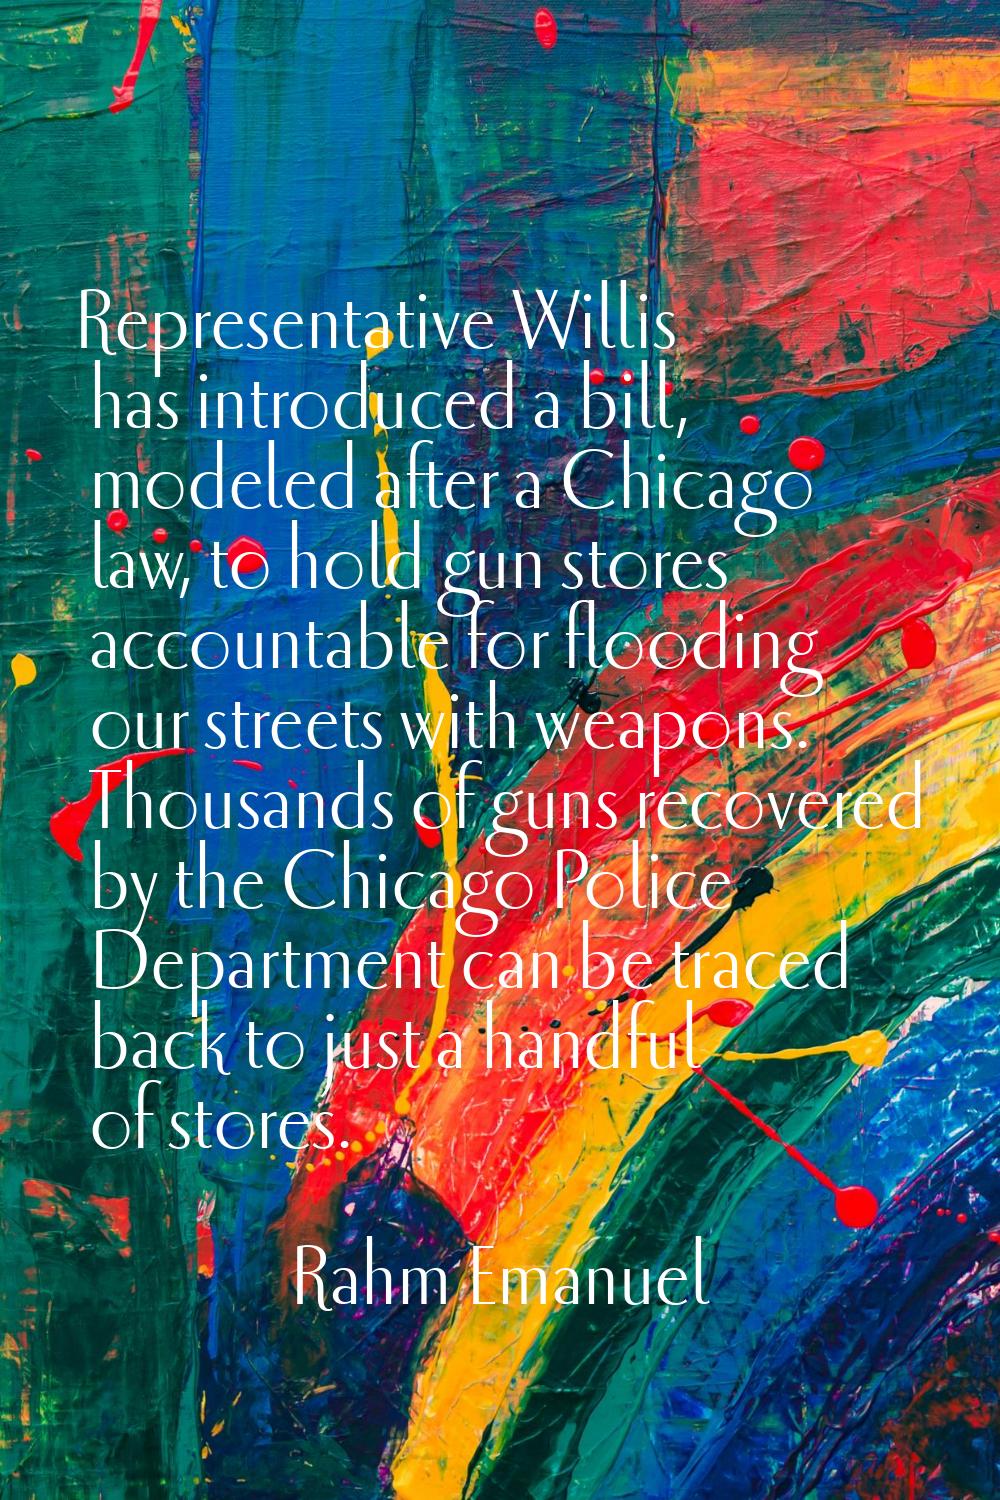 Representative Willis has introduced a bill, modeled after a Chicago law, to hold gun stores accoun